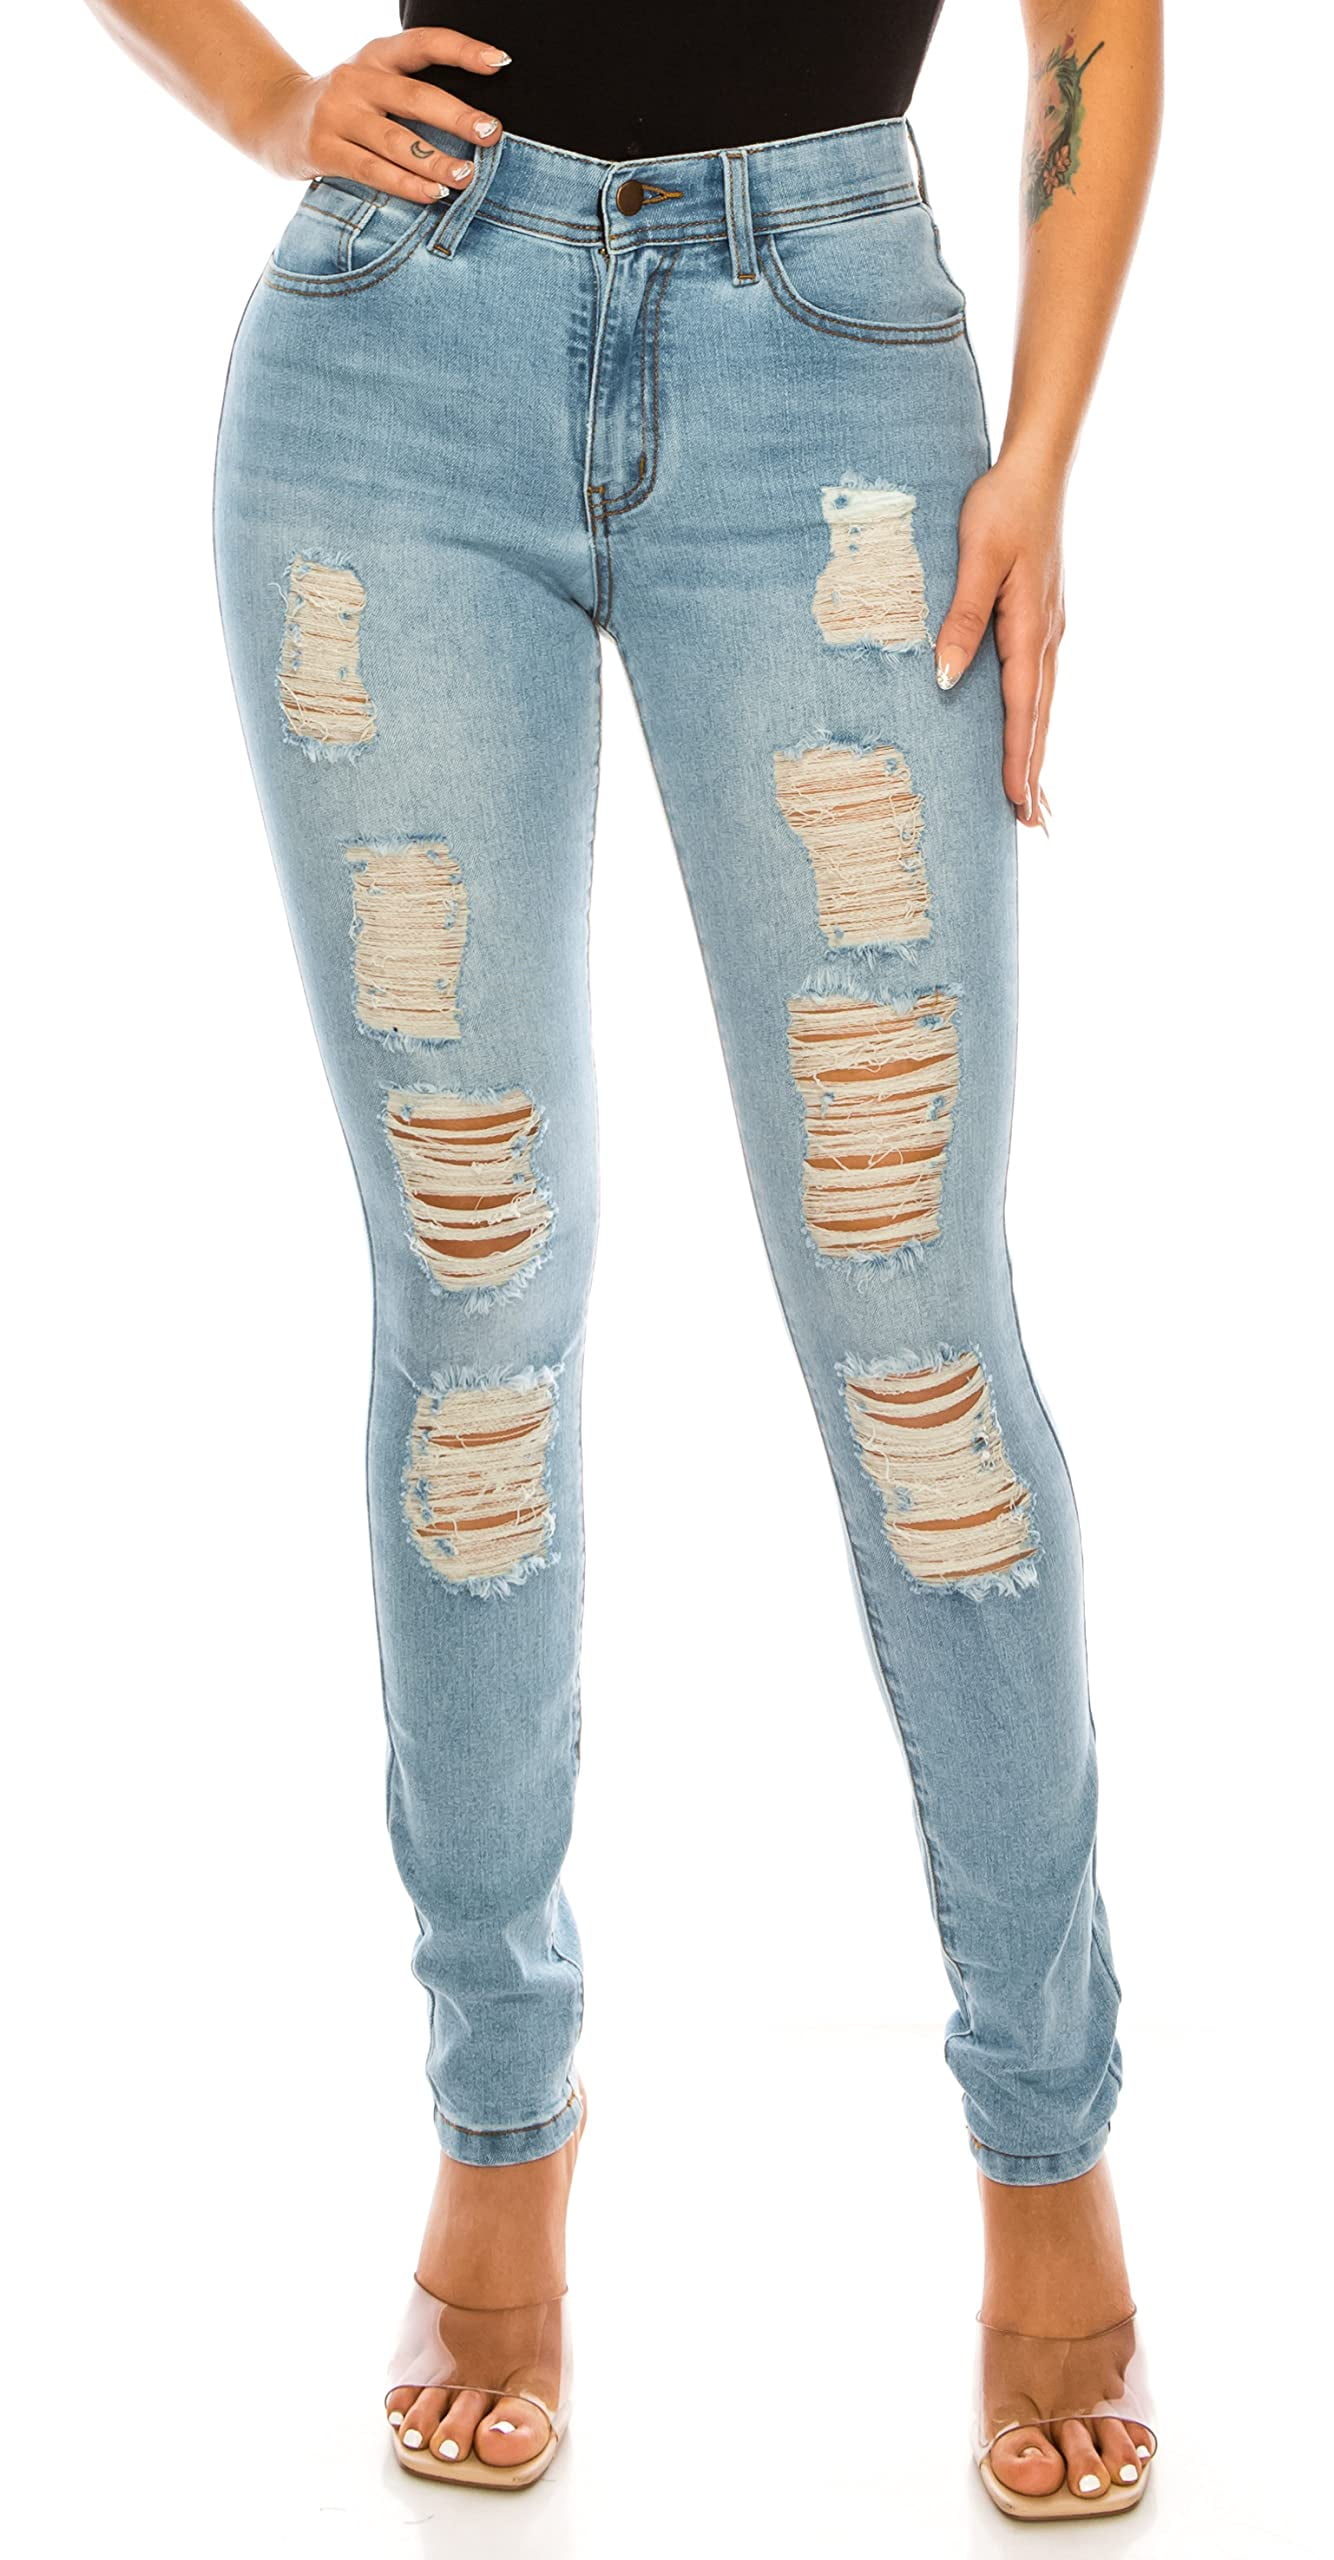 Double Denim Women's Skinny Jeans Casual Distressed Ripped Elastic ...